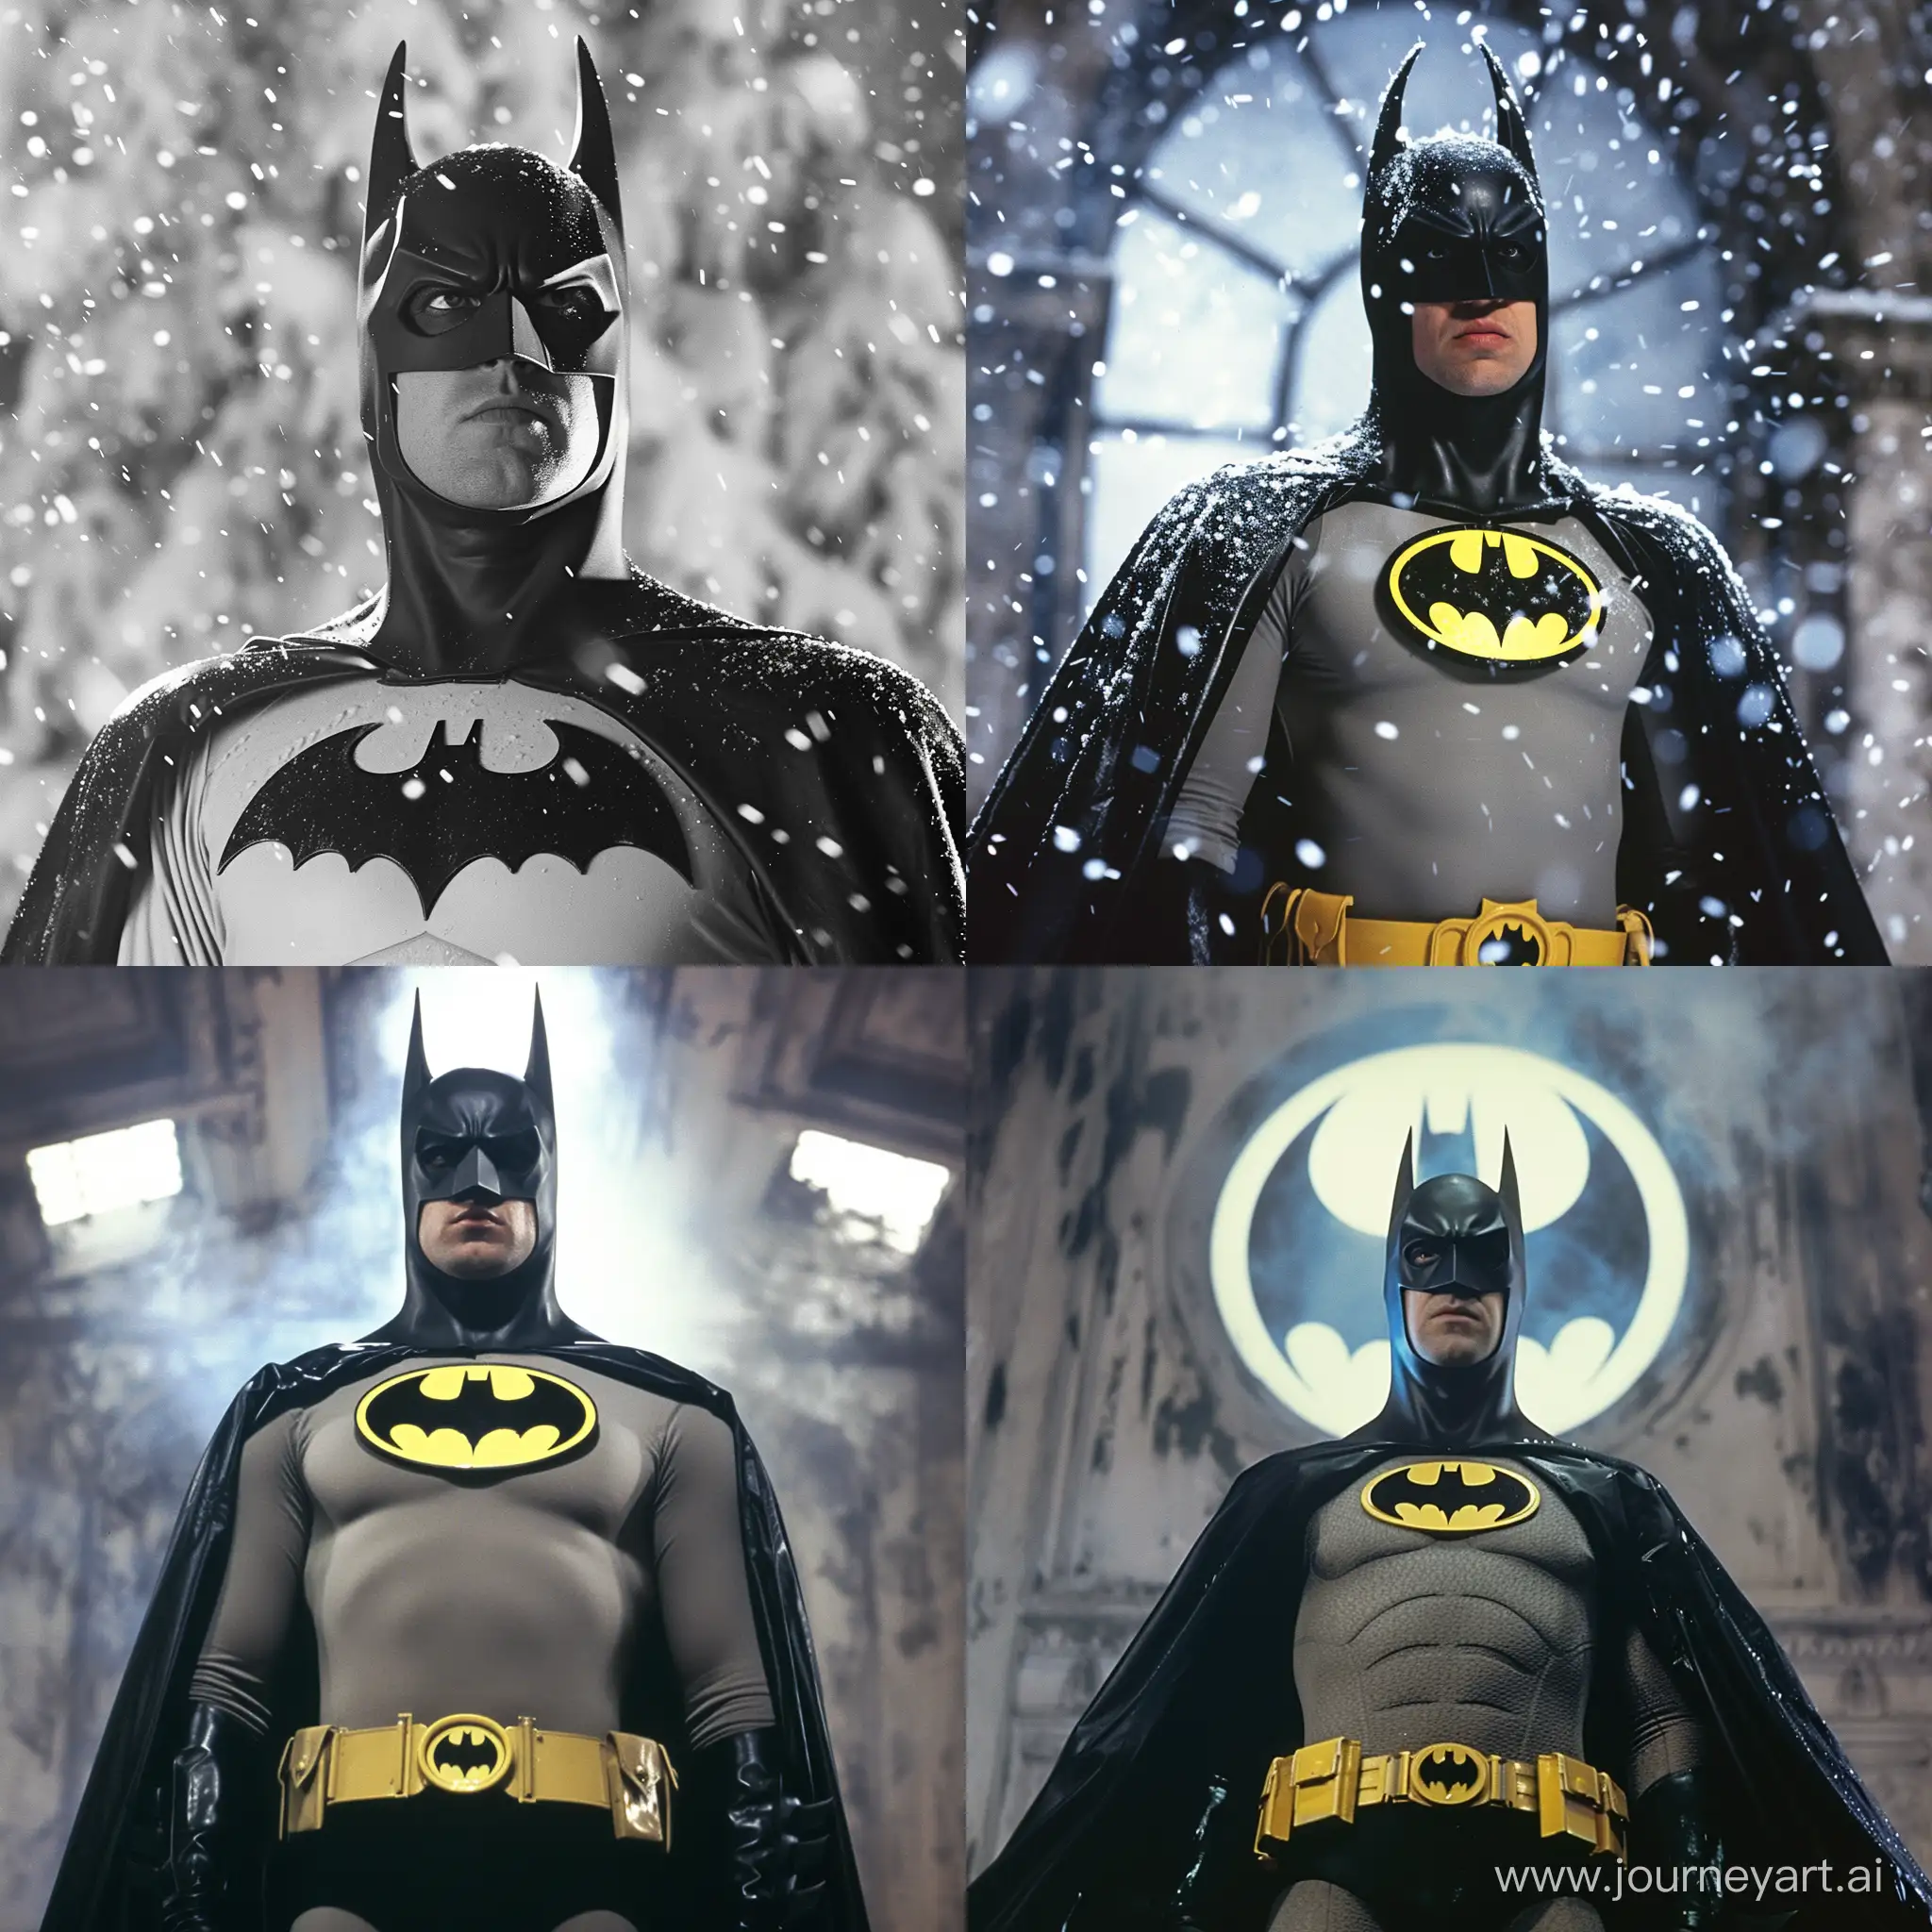 Michael-Keatons-Iconic-Batman-in-White-A-Nostalgic-Tribute-to-the-1989-Classic